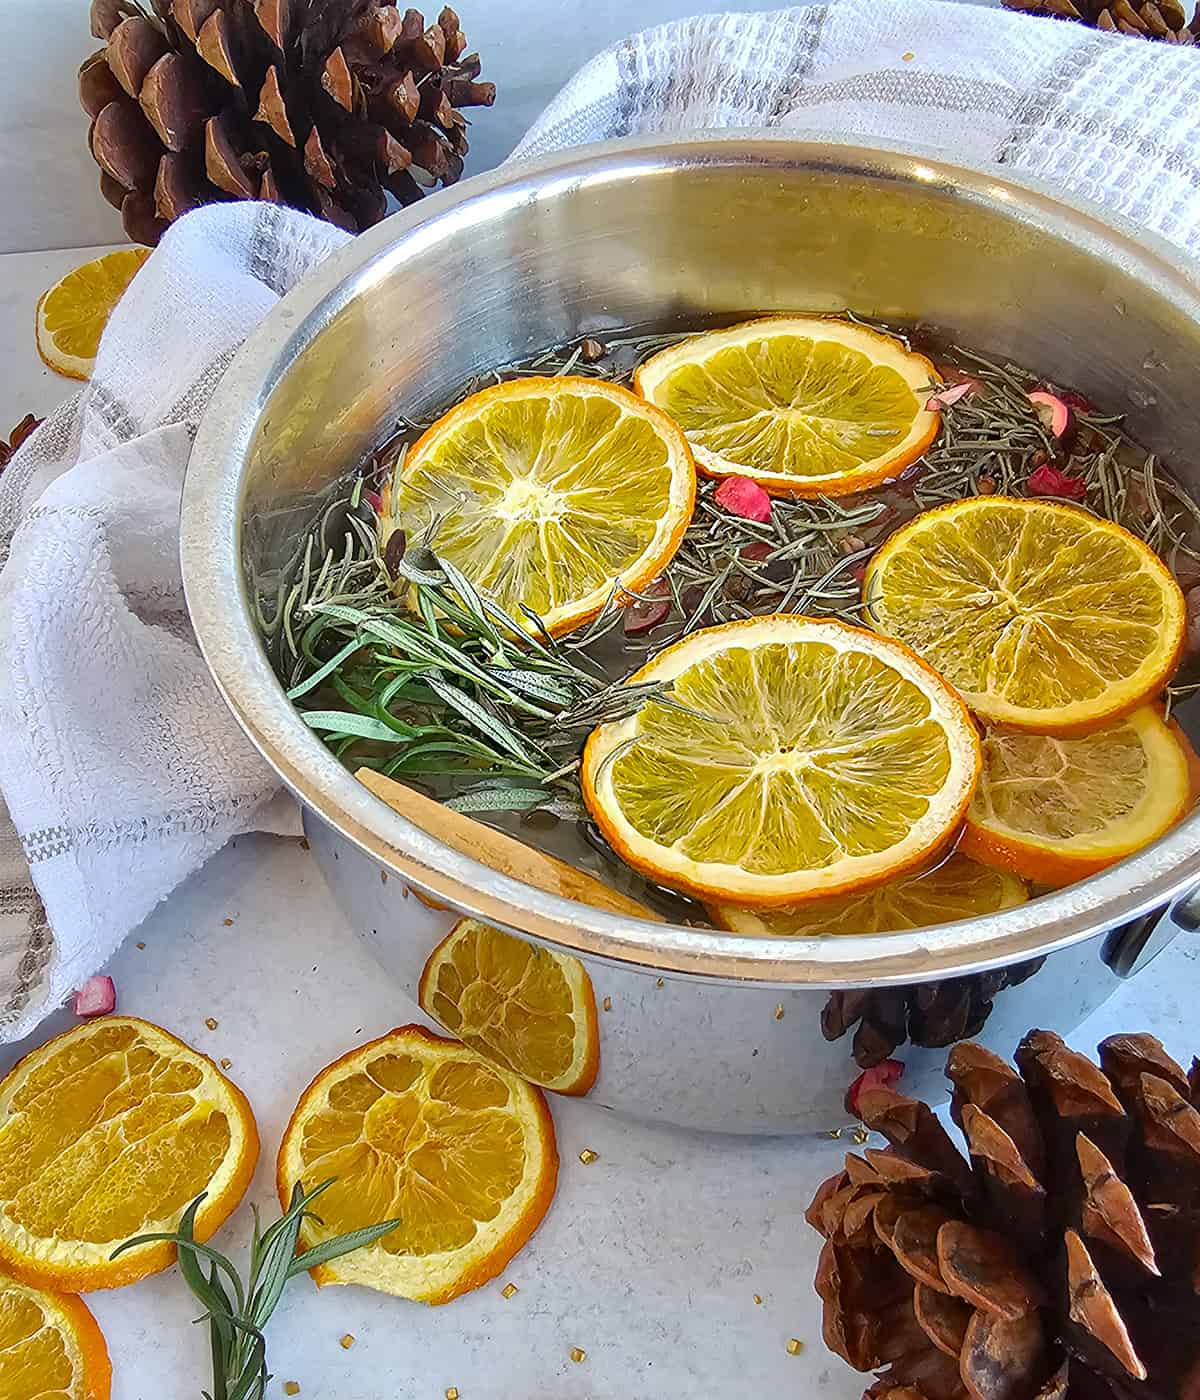 A bowl filled with dried orange slices and herbs with pinecones on the table.